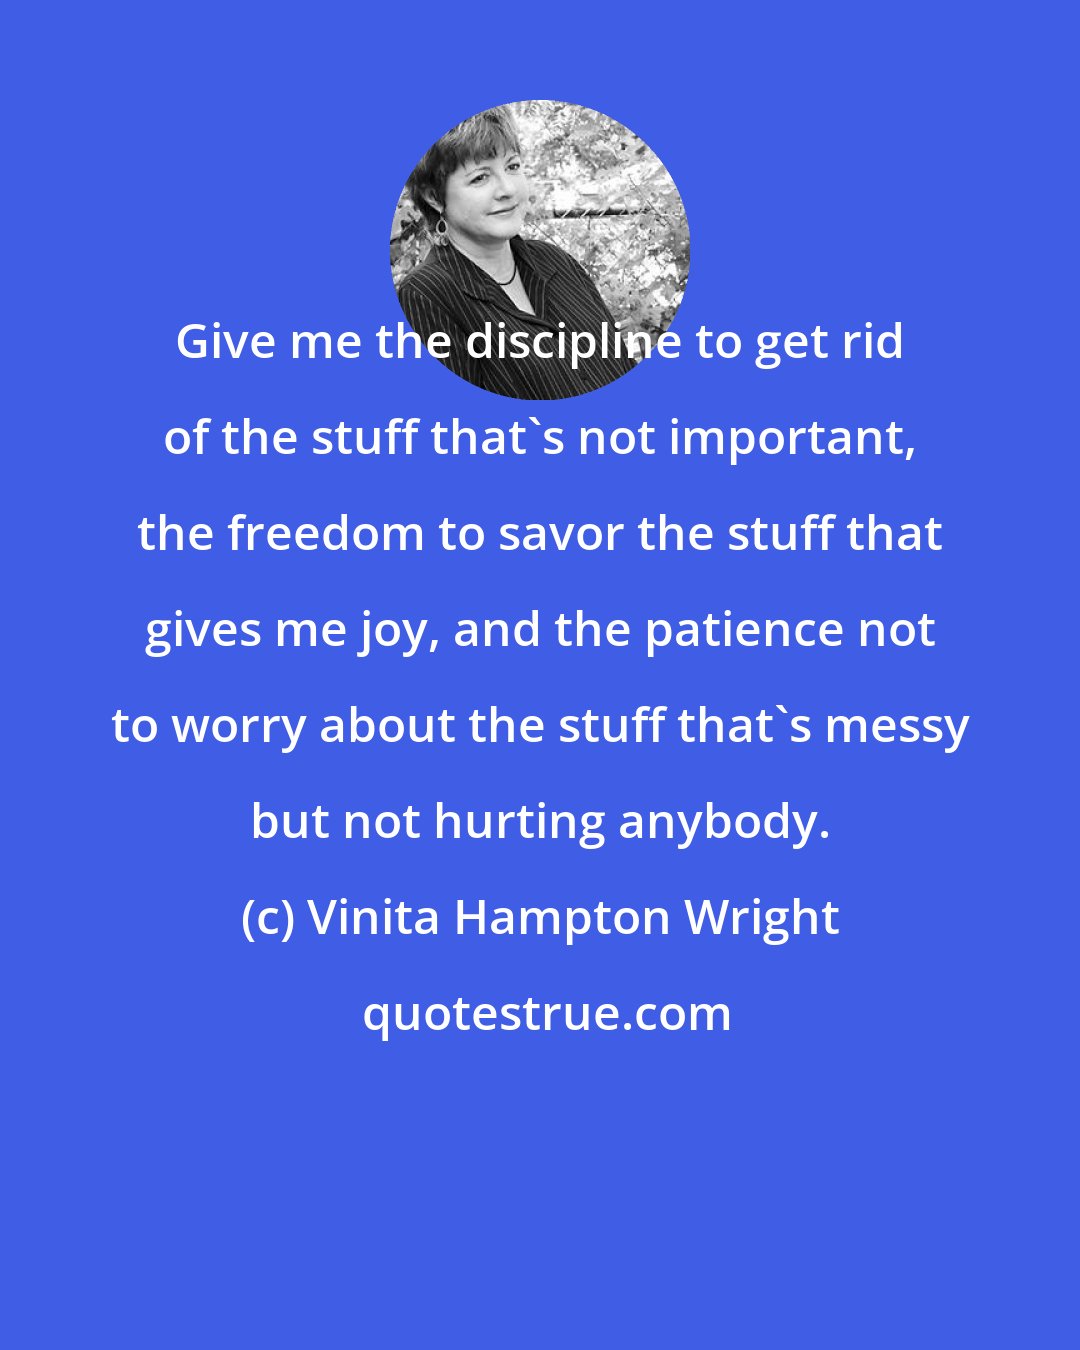 Vinita Hampton Wright: Give me the discipline to get rid of the stuff that's not important, the freedom to savor the stuff that gives me joy, and the patience not to worry about the stuff that's messy but not hurting anybody.